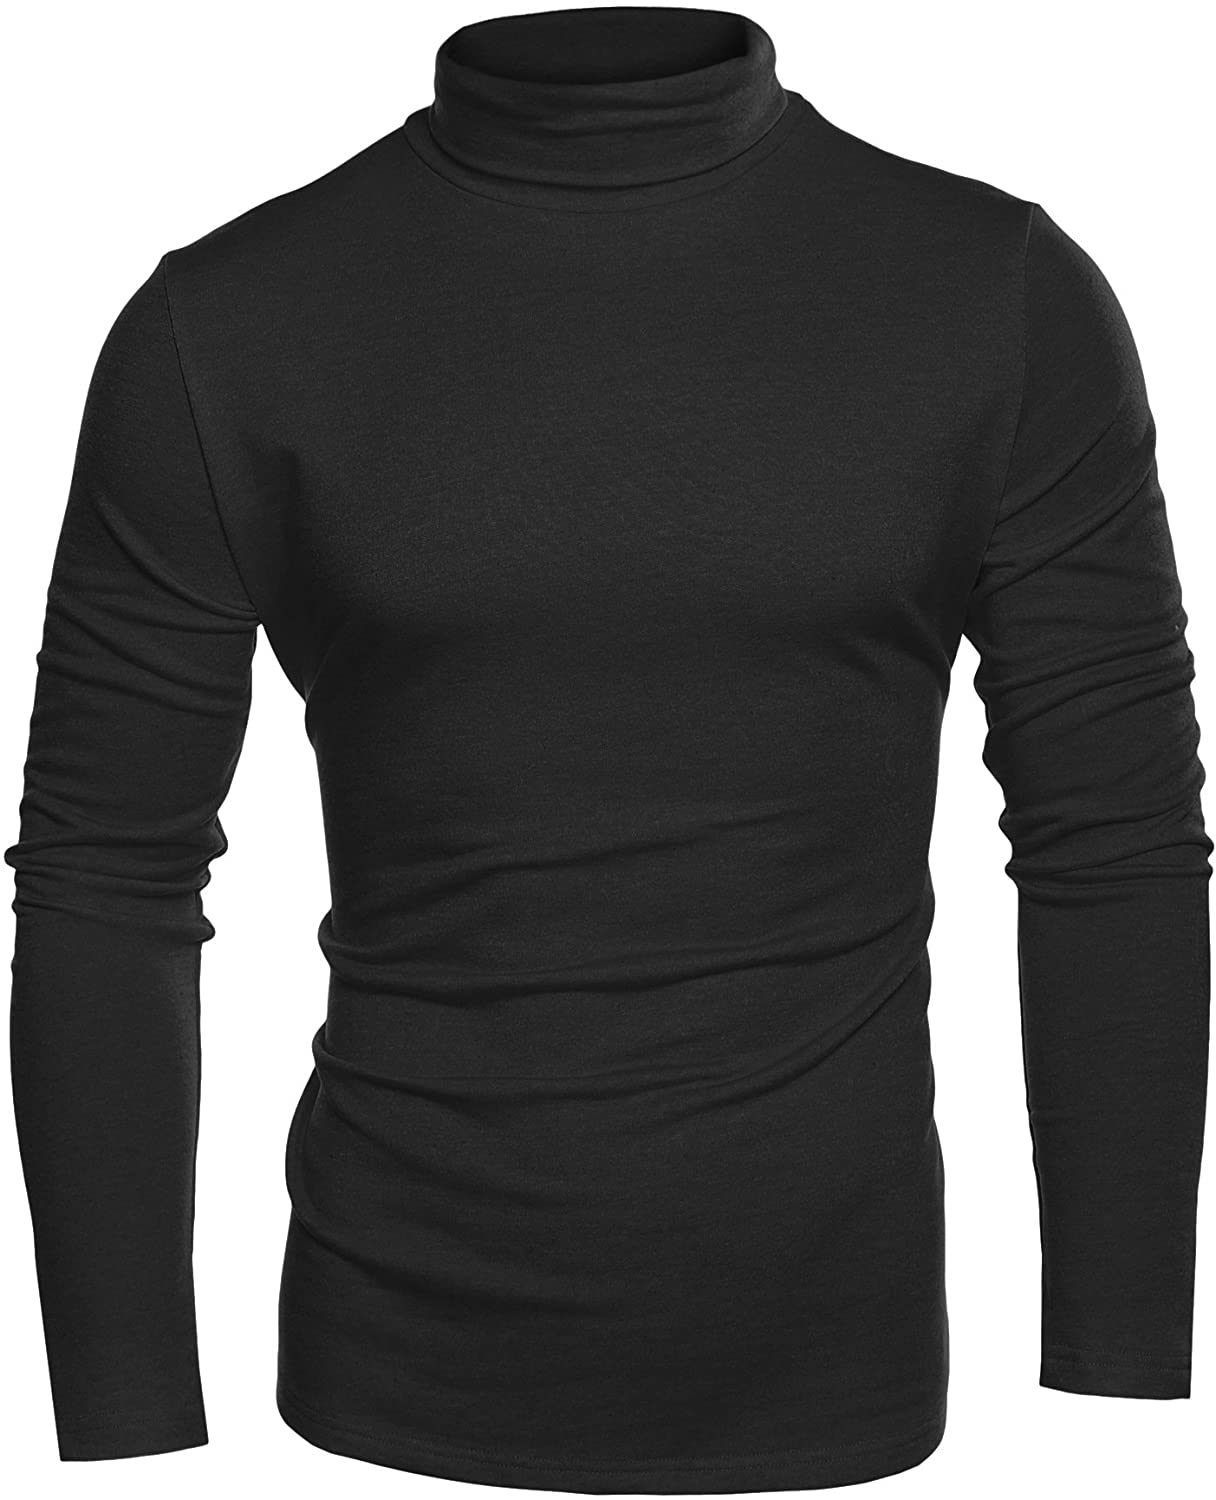 COOFANDY Men's Slim Fit Basic Thermal Turtleneck T Shirts Casual Cotton ...